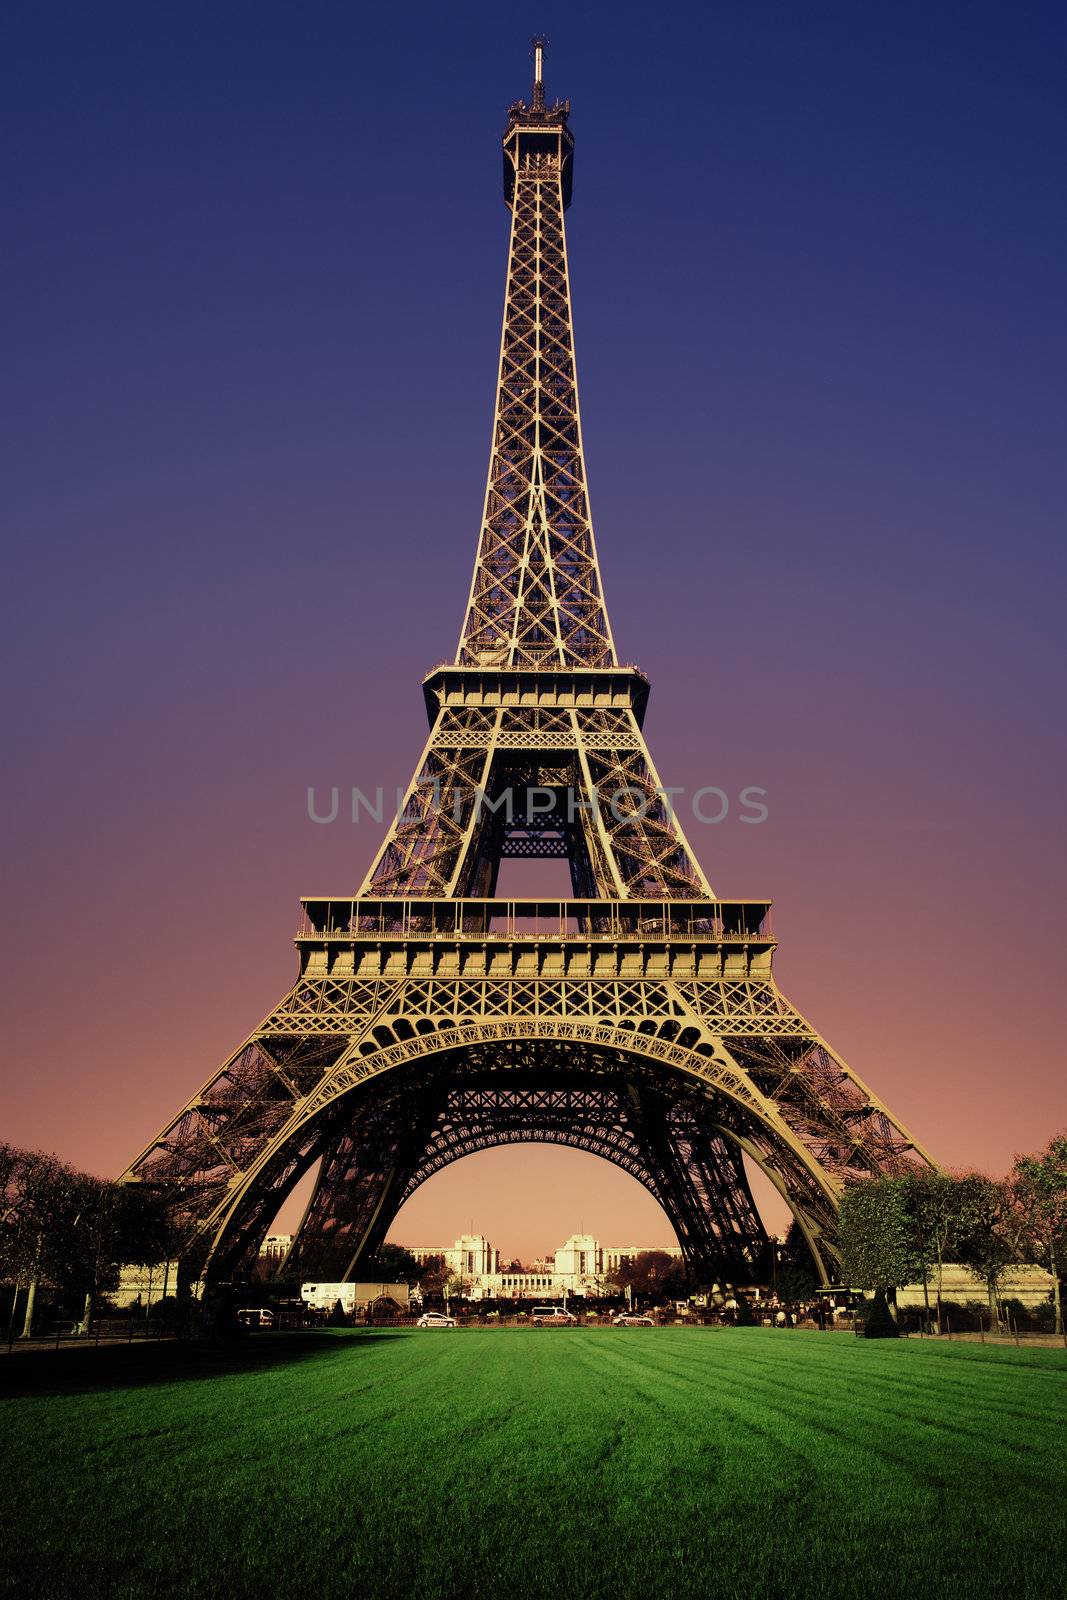 Eiffel Tower in the evening after sunset 